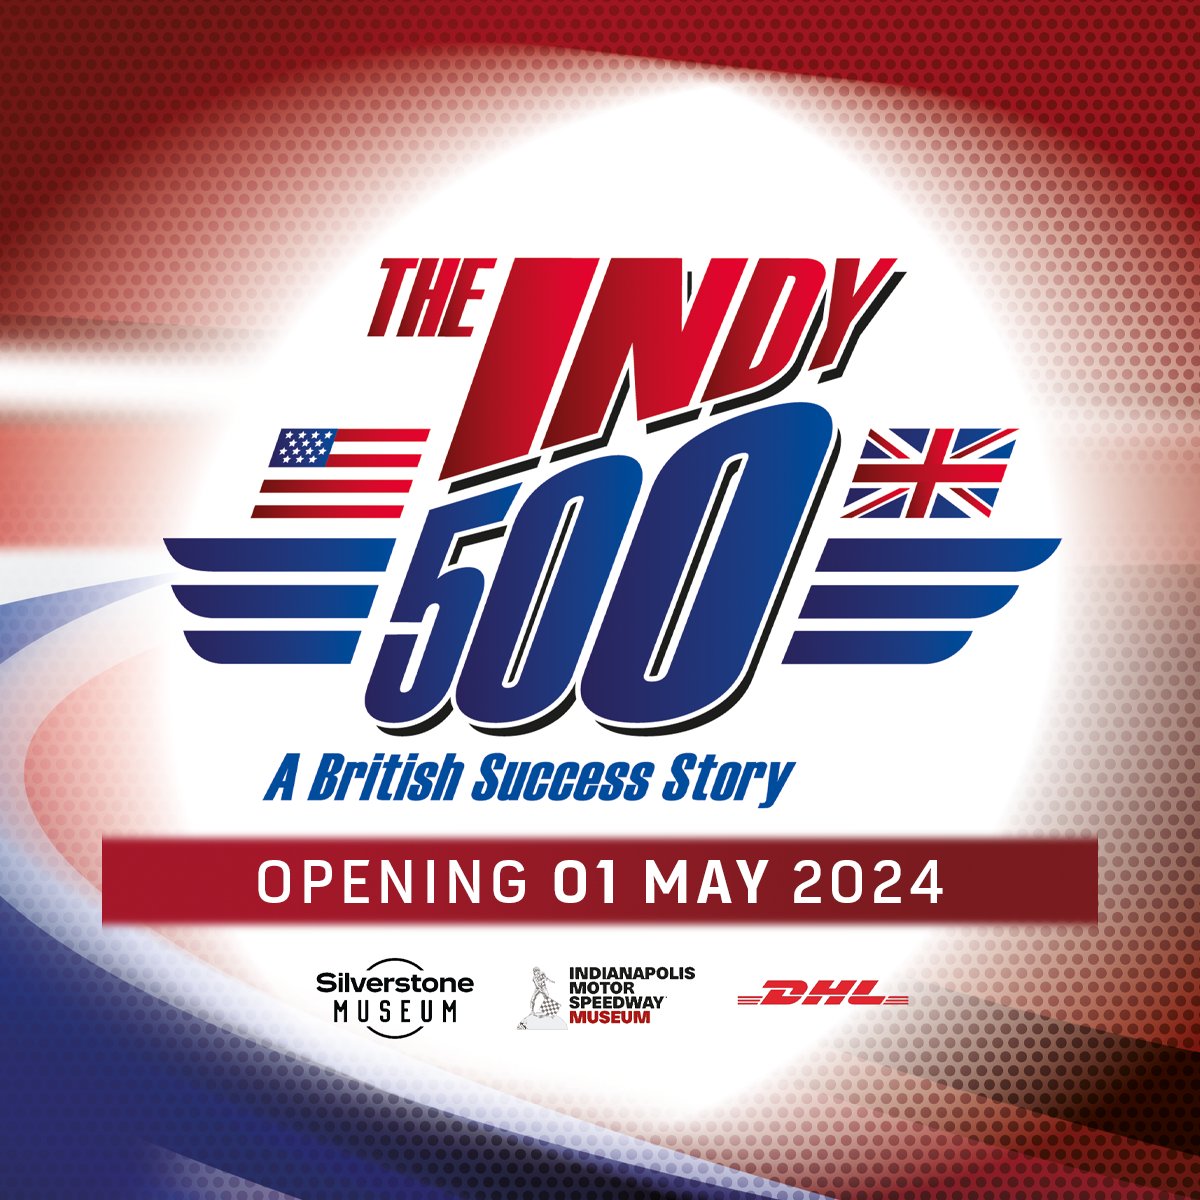 🇺🇸 THE INDYCARS ARE COMING! 🇬🇧  

Together with our partners at the @IMSMuseum and DHL, we're delighted to announce our newest exhibition, The Indy 500: A British Success Story will be live at Silverstone Museum from 1st May!

#indycar #nigelmansell #indy500 #silverstone